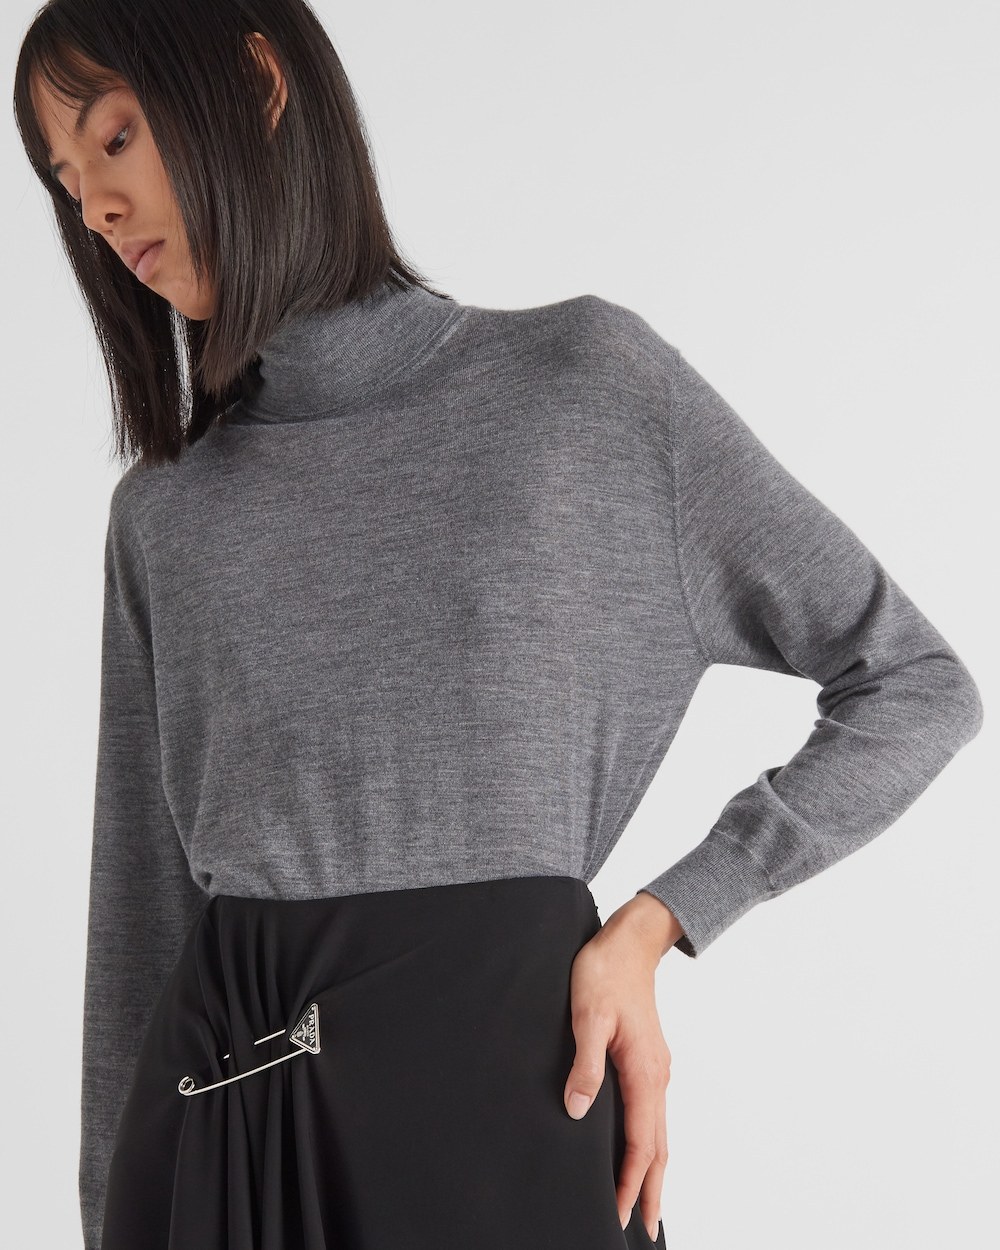 Shop PRADA Classic Cashmere and wool turtleneck sweater P26497_13LX_F0480_S_232 by Fujistyle | BUYMA